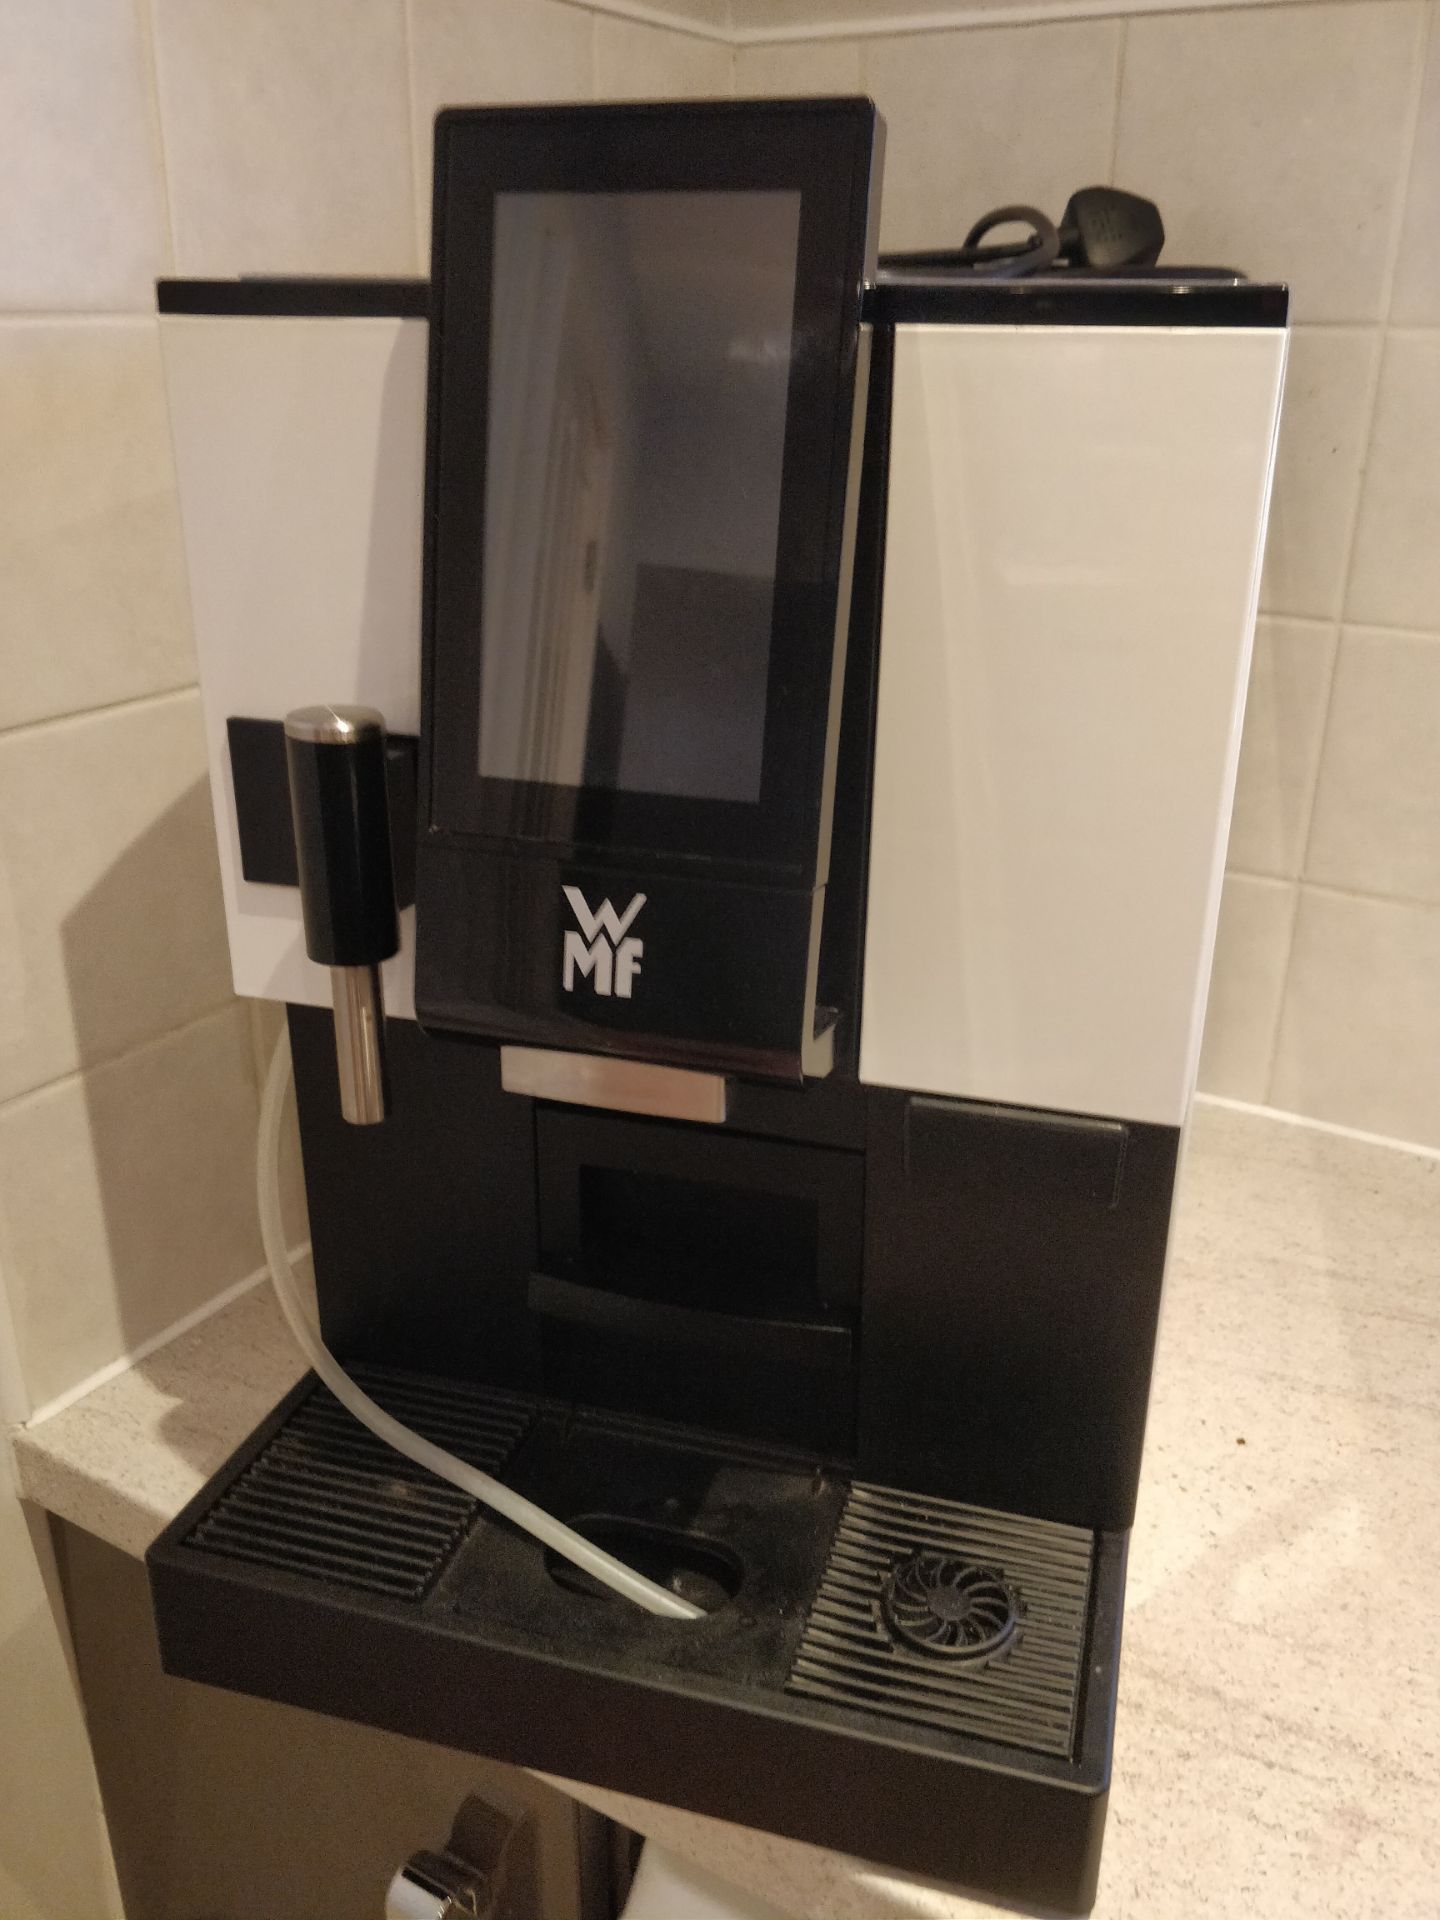 WMF 1100S - 4.5L Commercial Automatic Bean to cup coffee machine (2019)